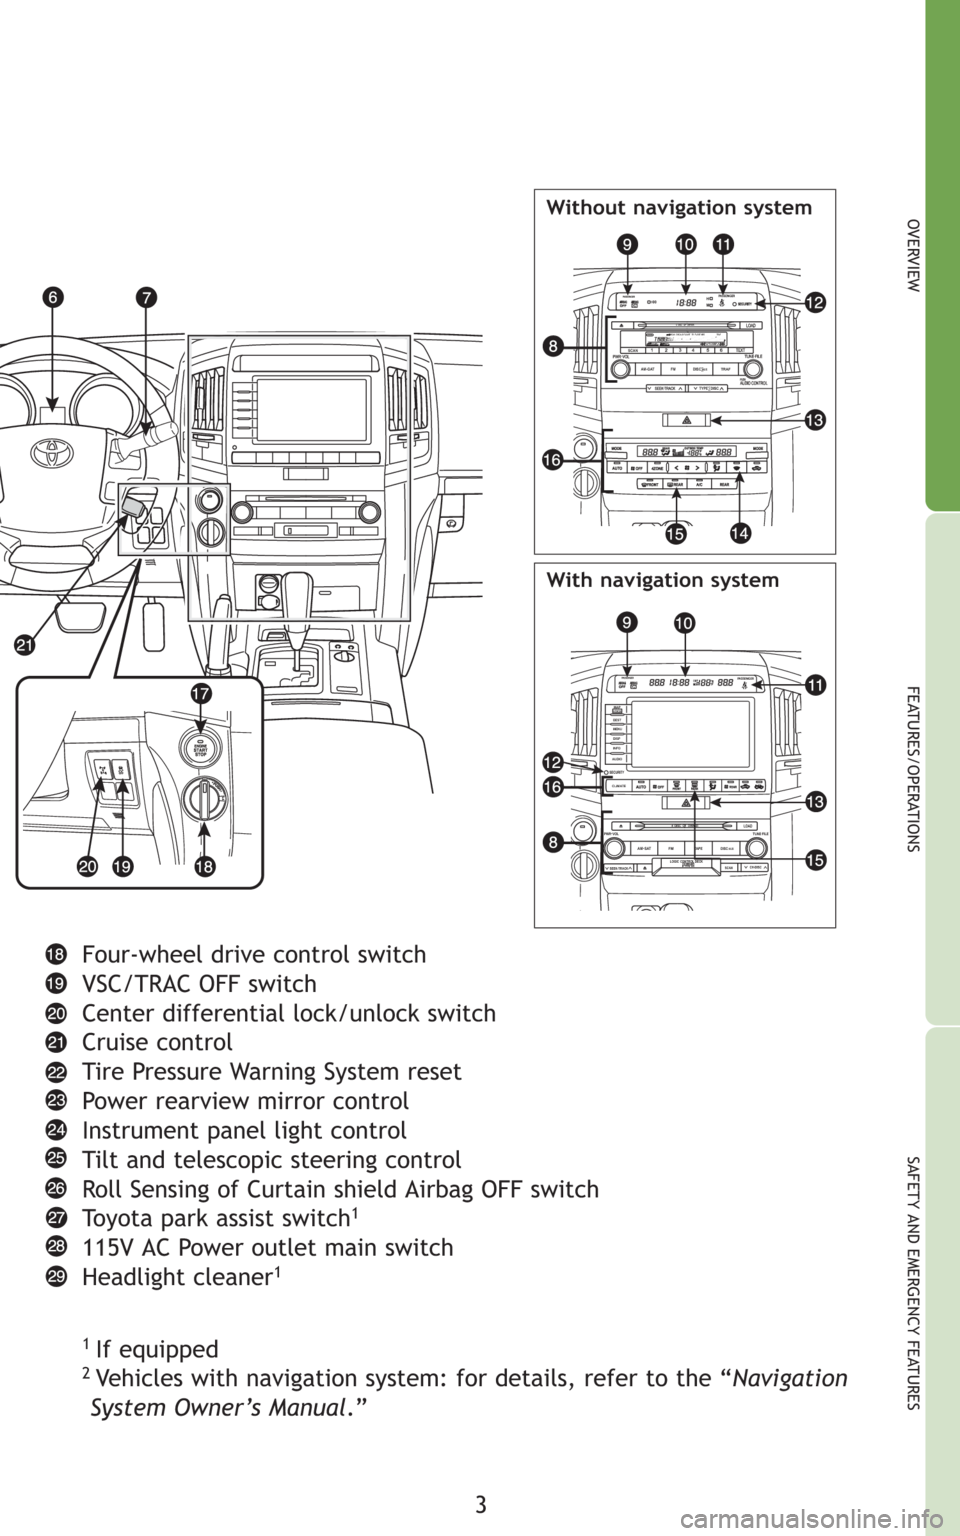 TOYOTA LAND CRUISER 2008 J200 Quick Reference Guide 3
OVERVIEW
FEATURES/OPERATIONS
SAFETY AND EMERGENCY FEATURES
CD INRAND RPTSCAN ALBDISC FLD ART TR FILE ST MEG TRAFPLDGNPAUTO-P  ART4 DISC  OF OWNER
TYPE∑DISCAM-GAT SCAN
FMDISC∑AUXTRAF
00H
M
LOADTU